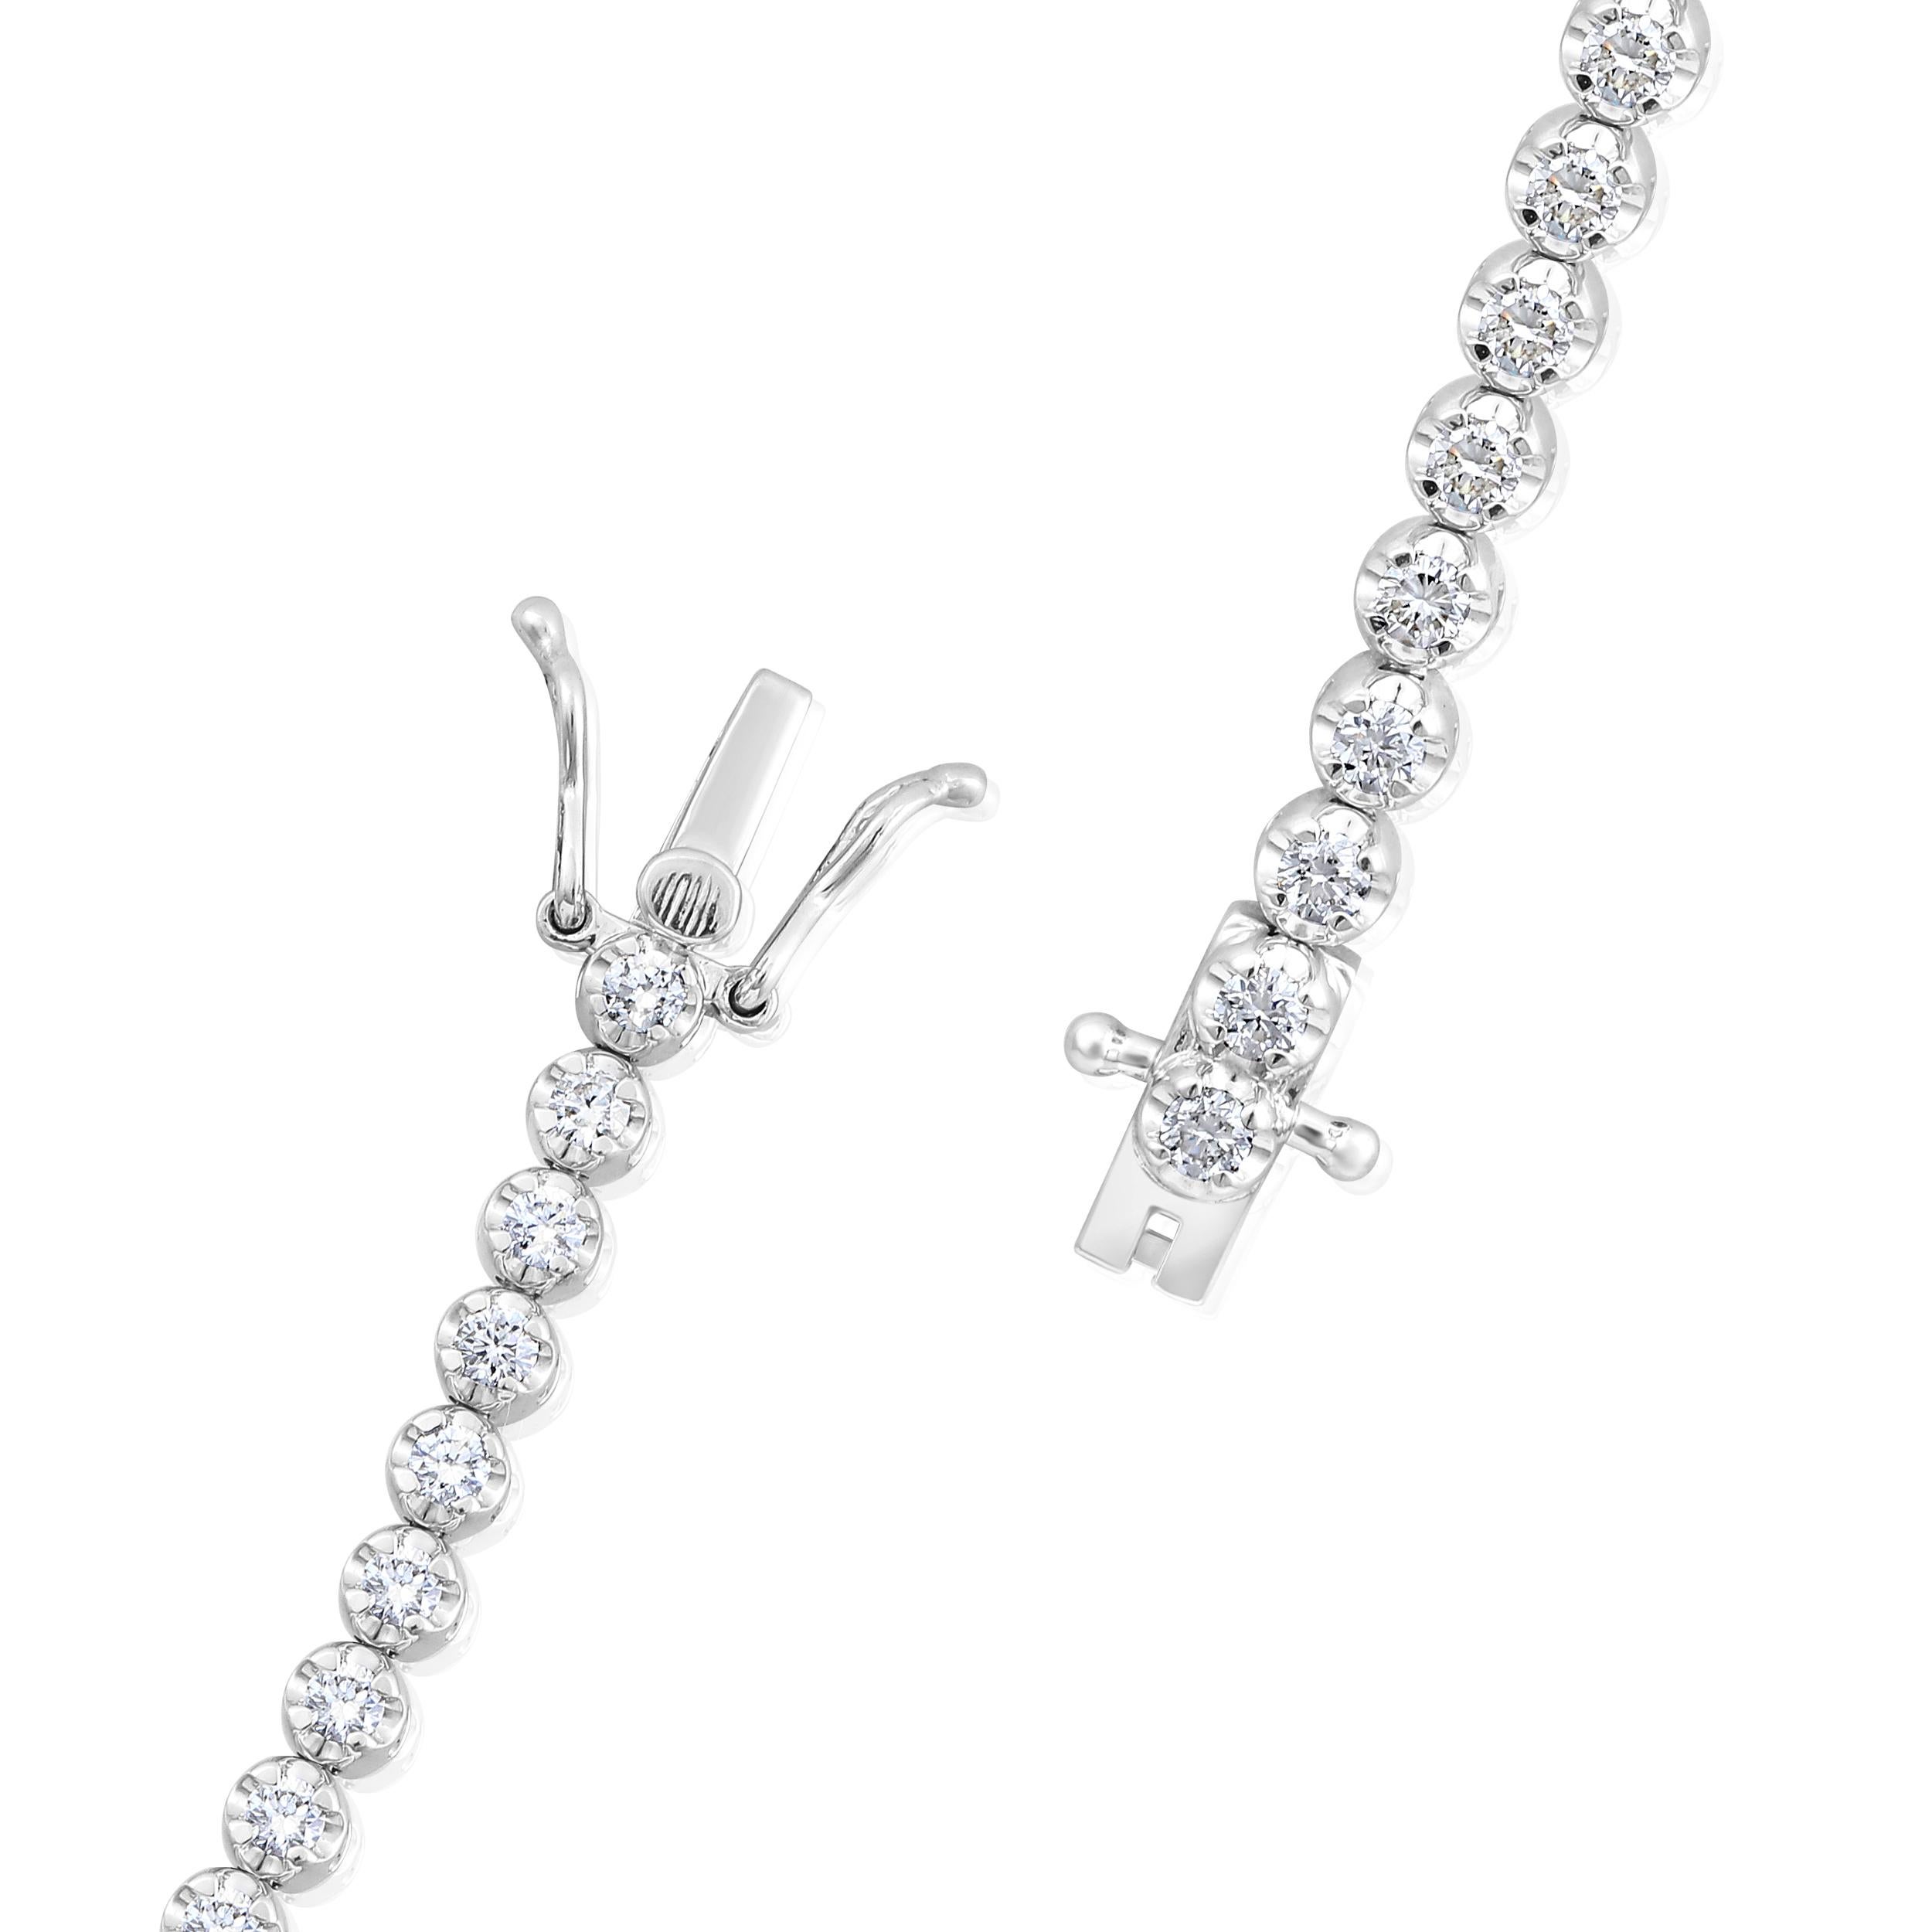 Crafted in 8.73 grams of 14K White Gold, the bracelet contains 54 stones of Round Diamonds with a total of 3.2 carat in F-G color and VS-SI carat. The bracelet length is 7 inches.

This jewelry piece will be expertly crafted by our skilled artisans